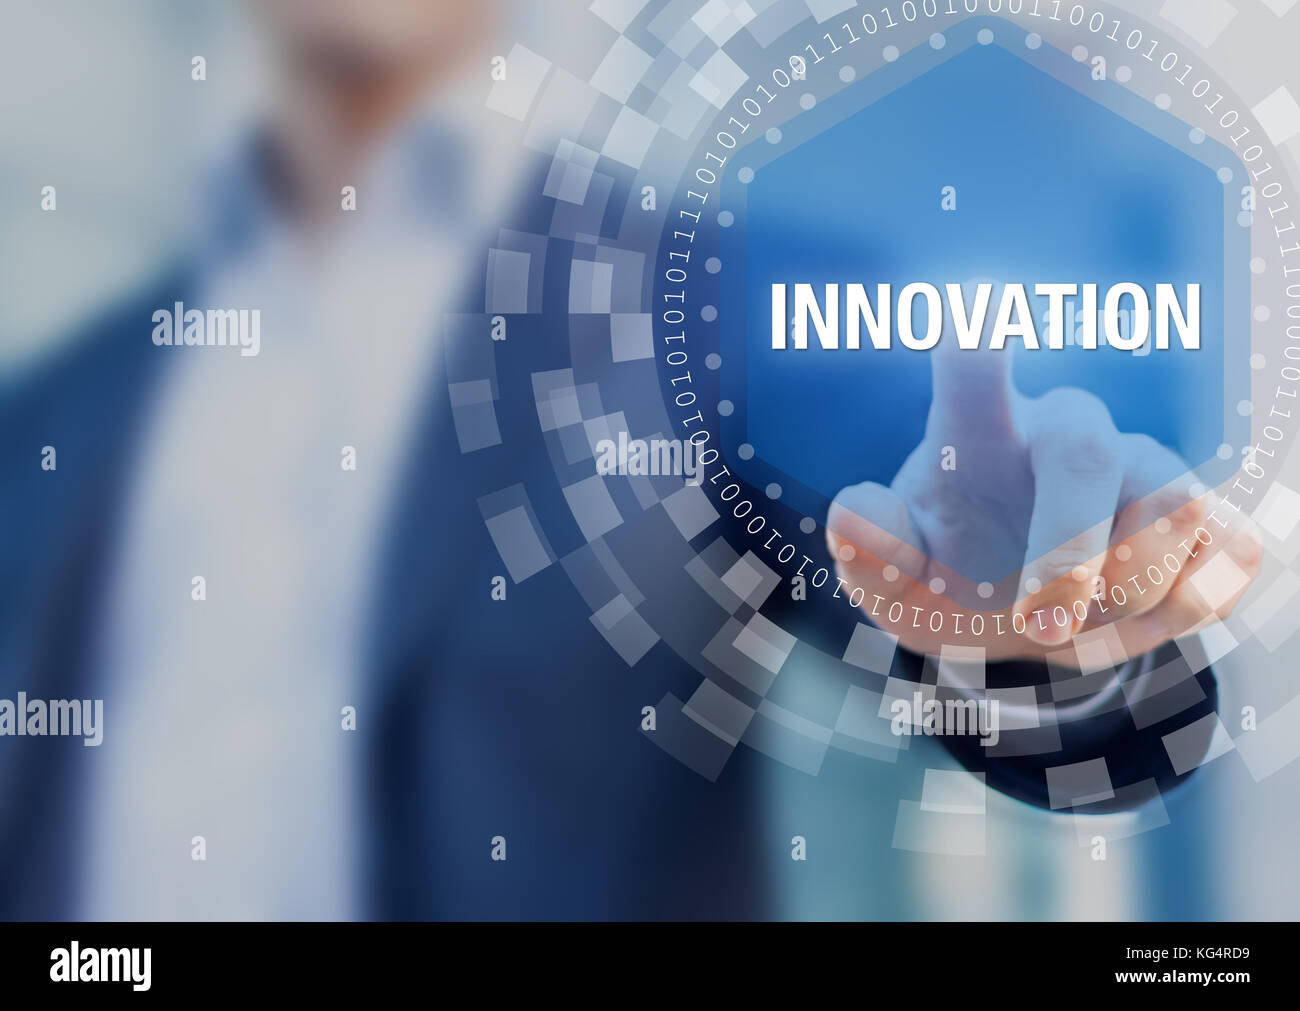 Innovation concept with researcher presenting innovative ideas and new technologies on virtual screen Stock Photo